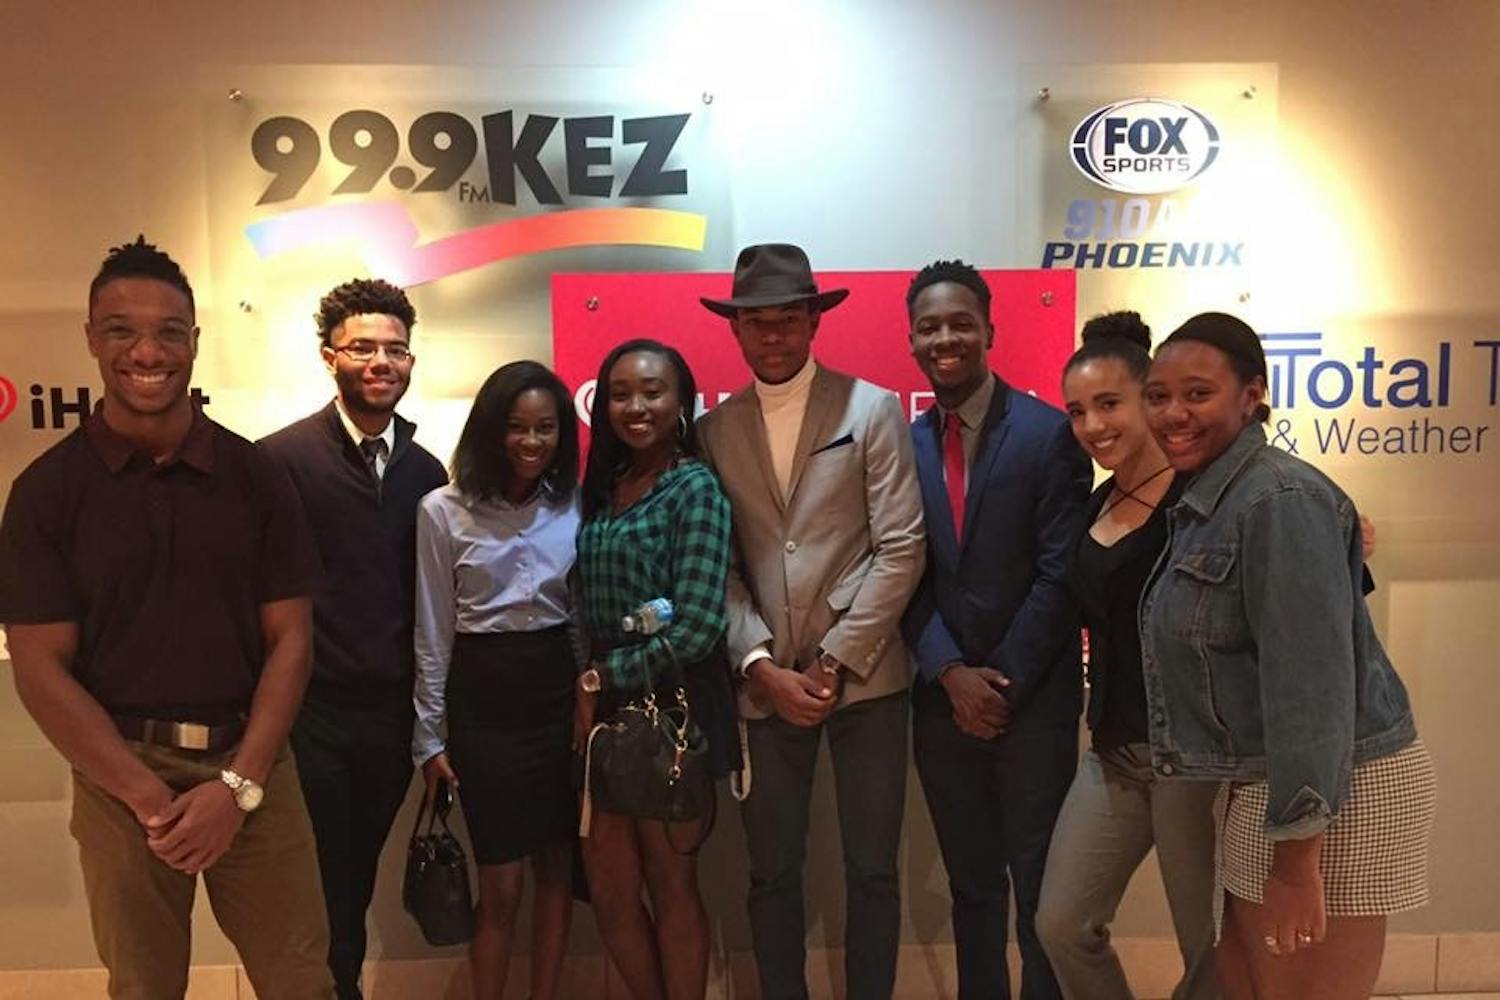 Members of the ASU chapter of the&nbsp;National Association of Black Journalists pose for a photo a the iHeartRadio studio on Nov. 18, 2016, in downtown Phoenix, Arizona.&nbsp;